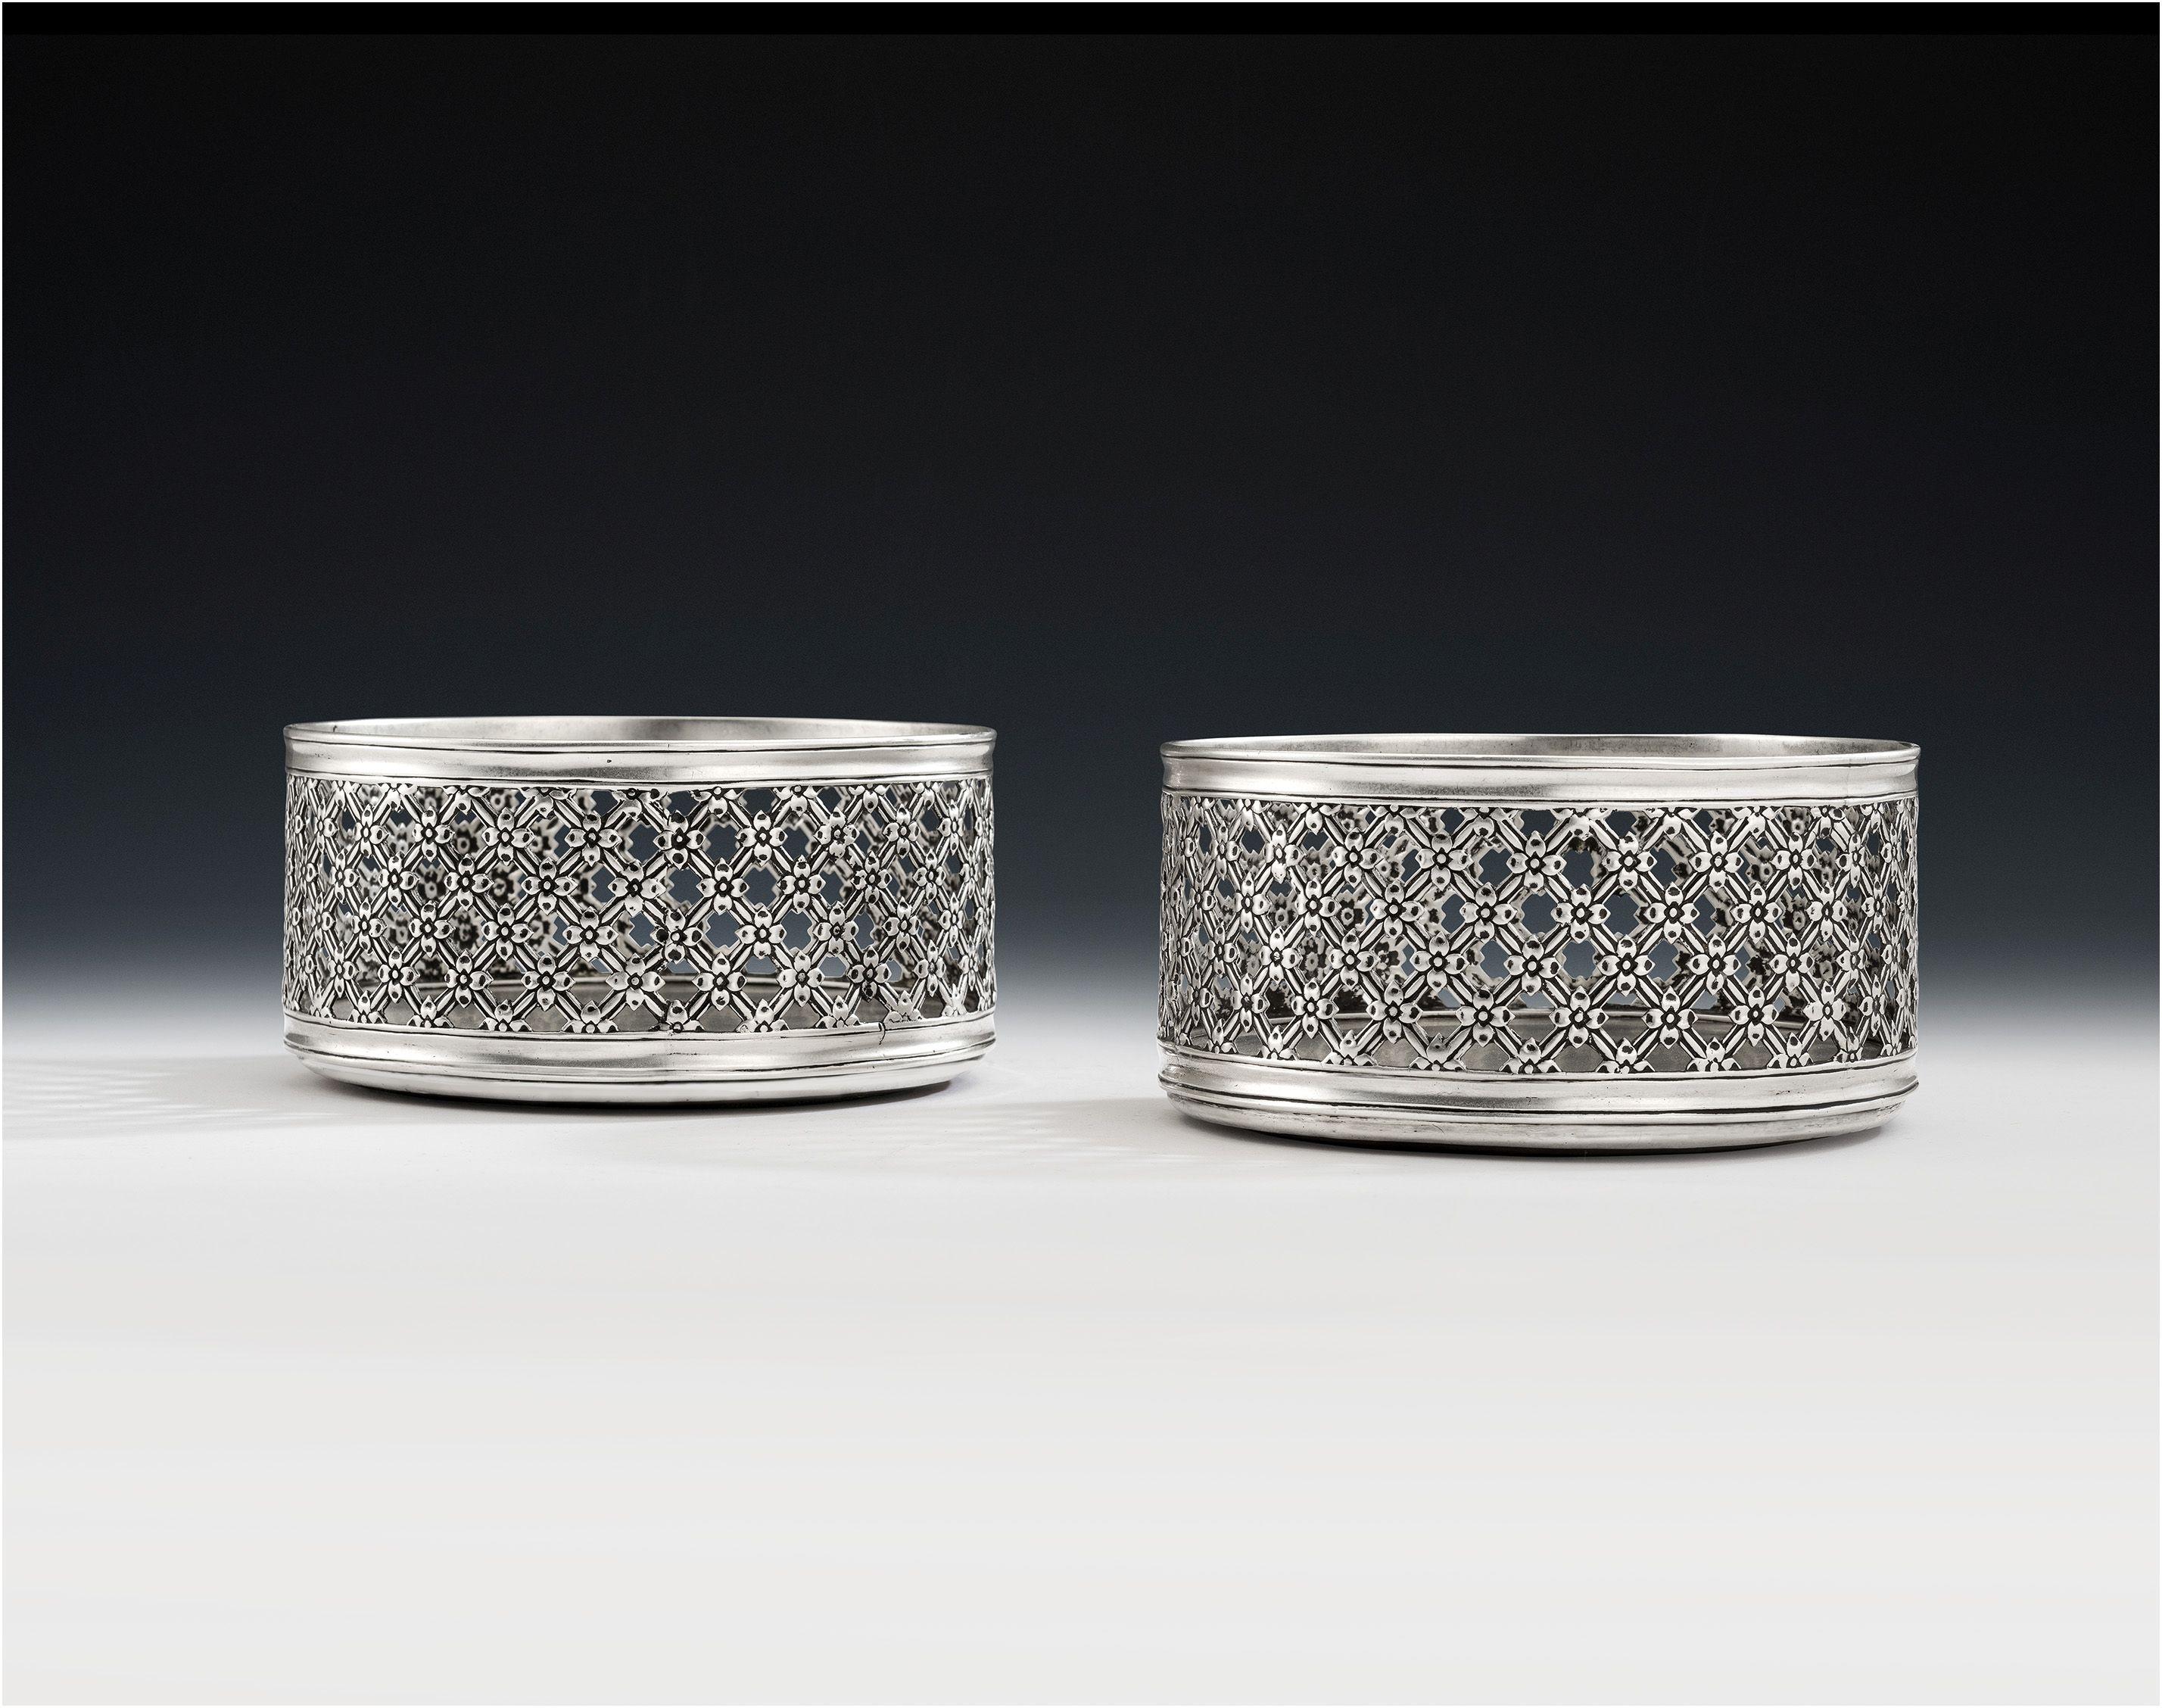 This exceptionally rare and unusual pair of floral trellis work silver based magnum wine coasters were made in London in 1852 by Daniel & Charles Houle. Both pieces are of a large size, with deep sides and plain silver bases. The sides are pierced